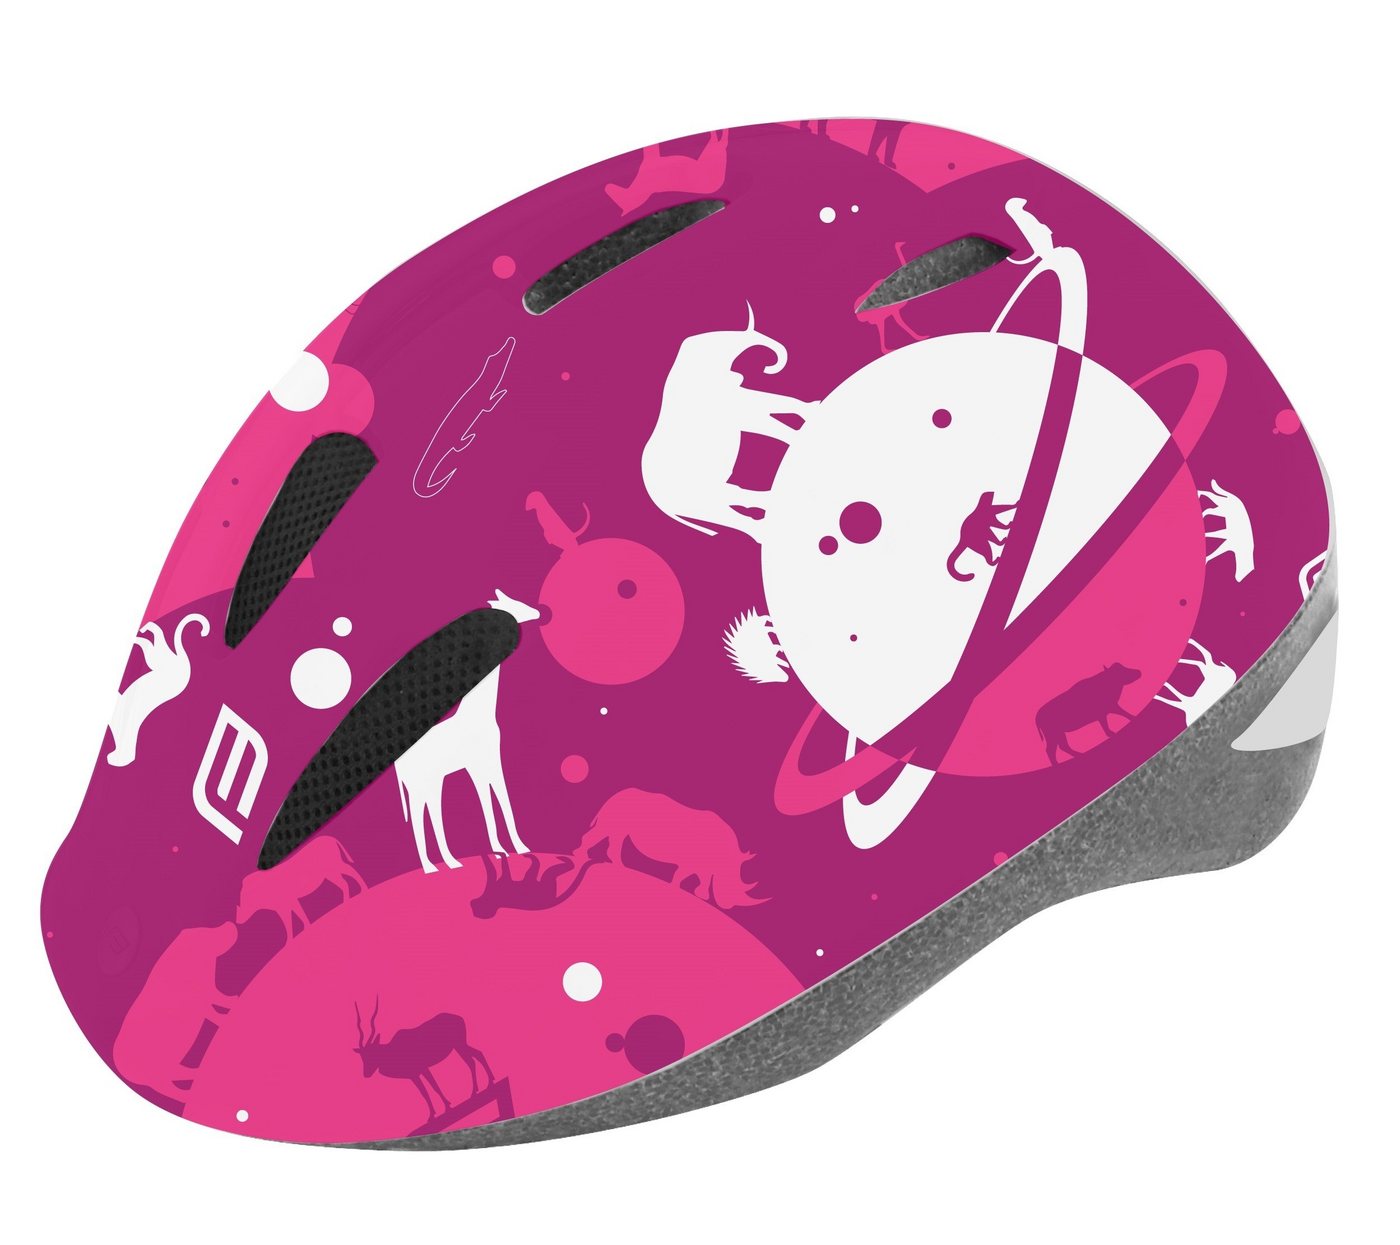 FORCE Fahrradhelm Helm FORCE FUN PLANETS child pink-white S von FORCE